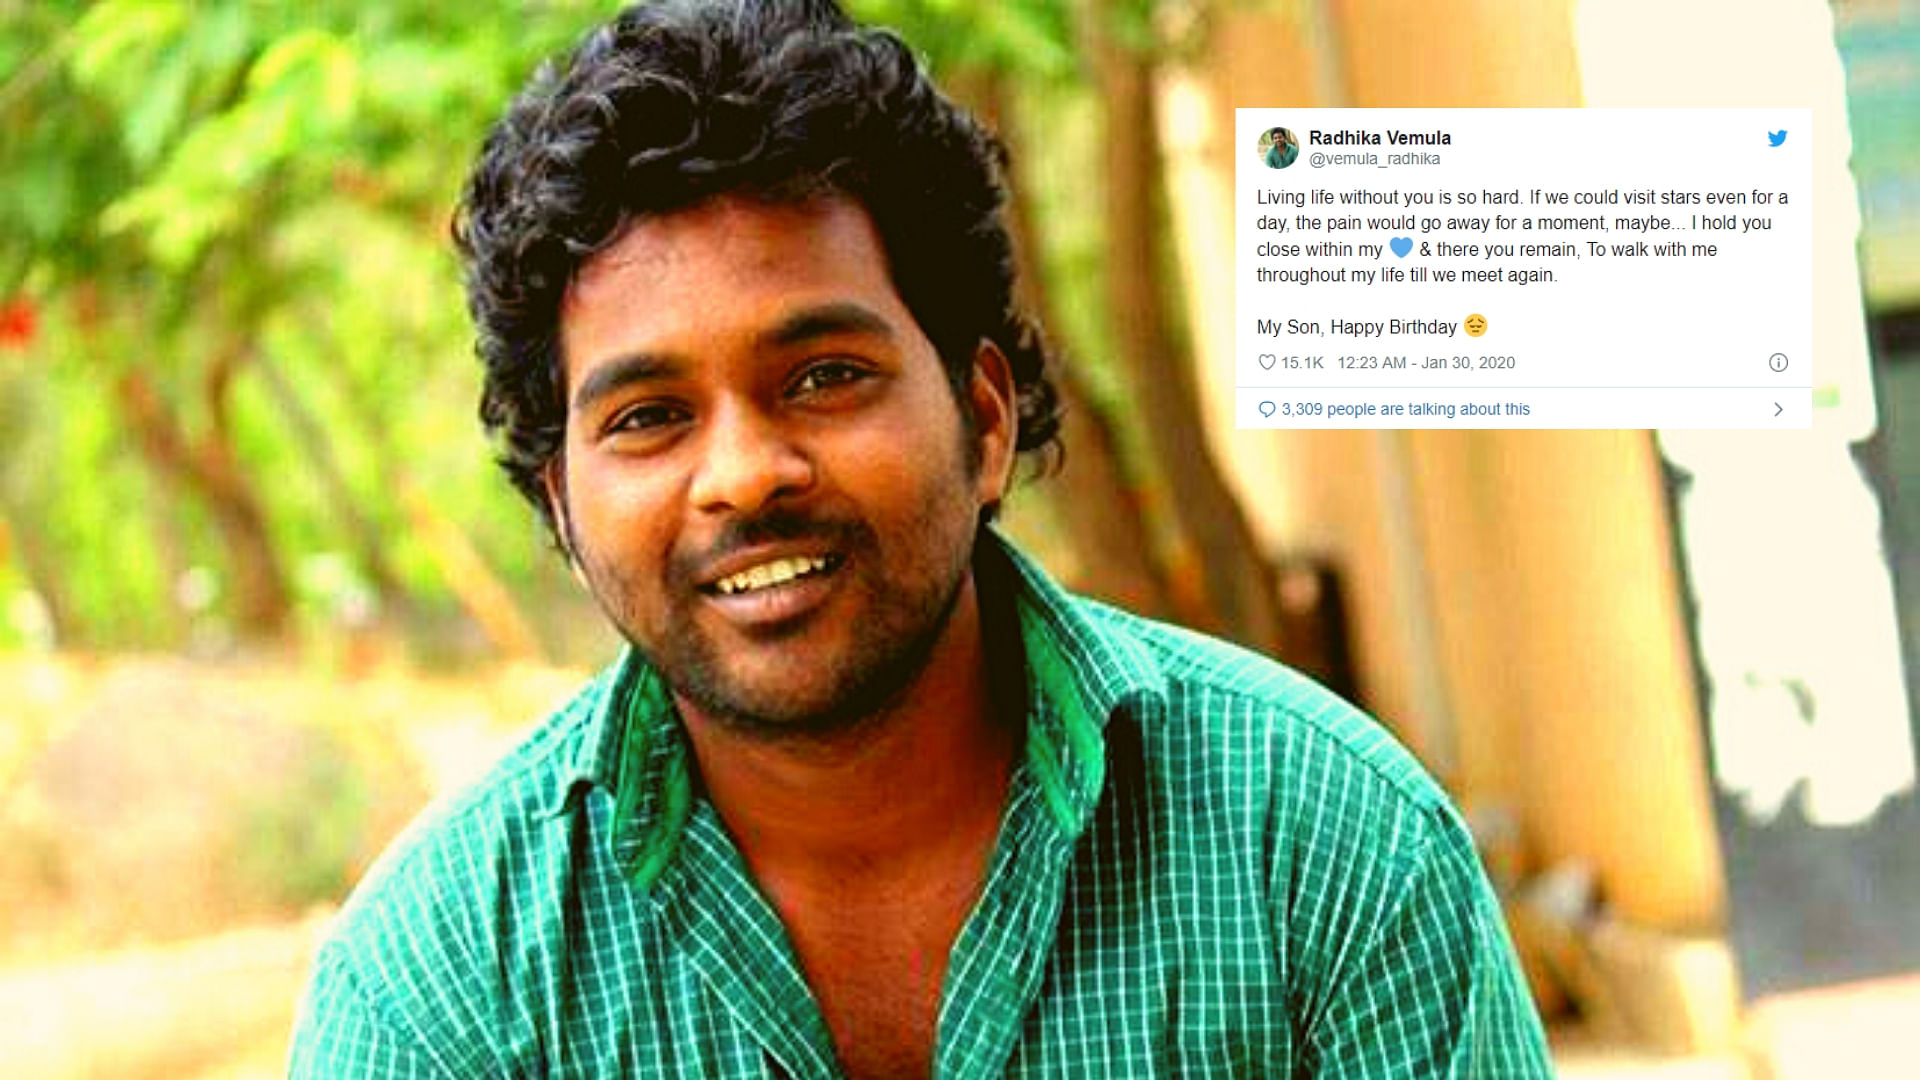 On his birth anniversary, Rohith Vemula’s mother, Radhika Vemula, on Thursday 30 January, remembered her son with a heartfelt message on twitter.